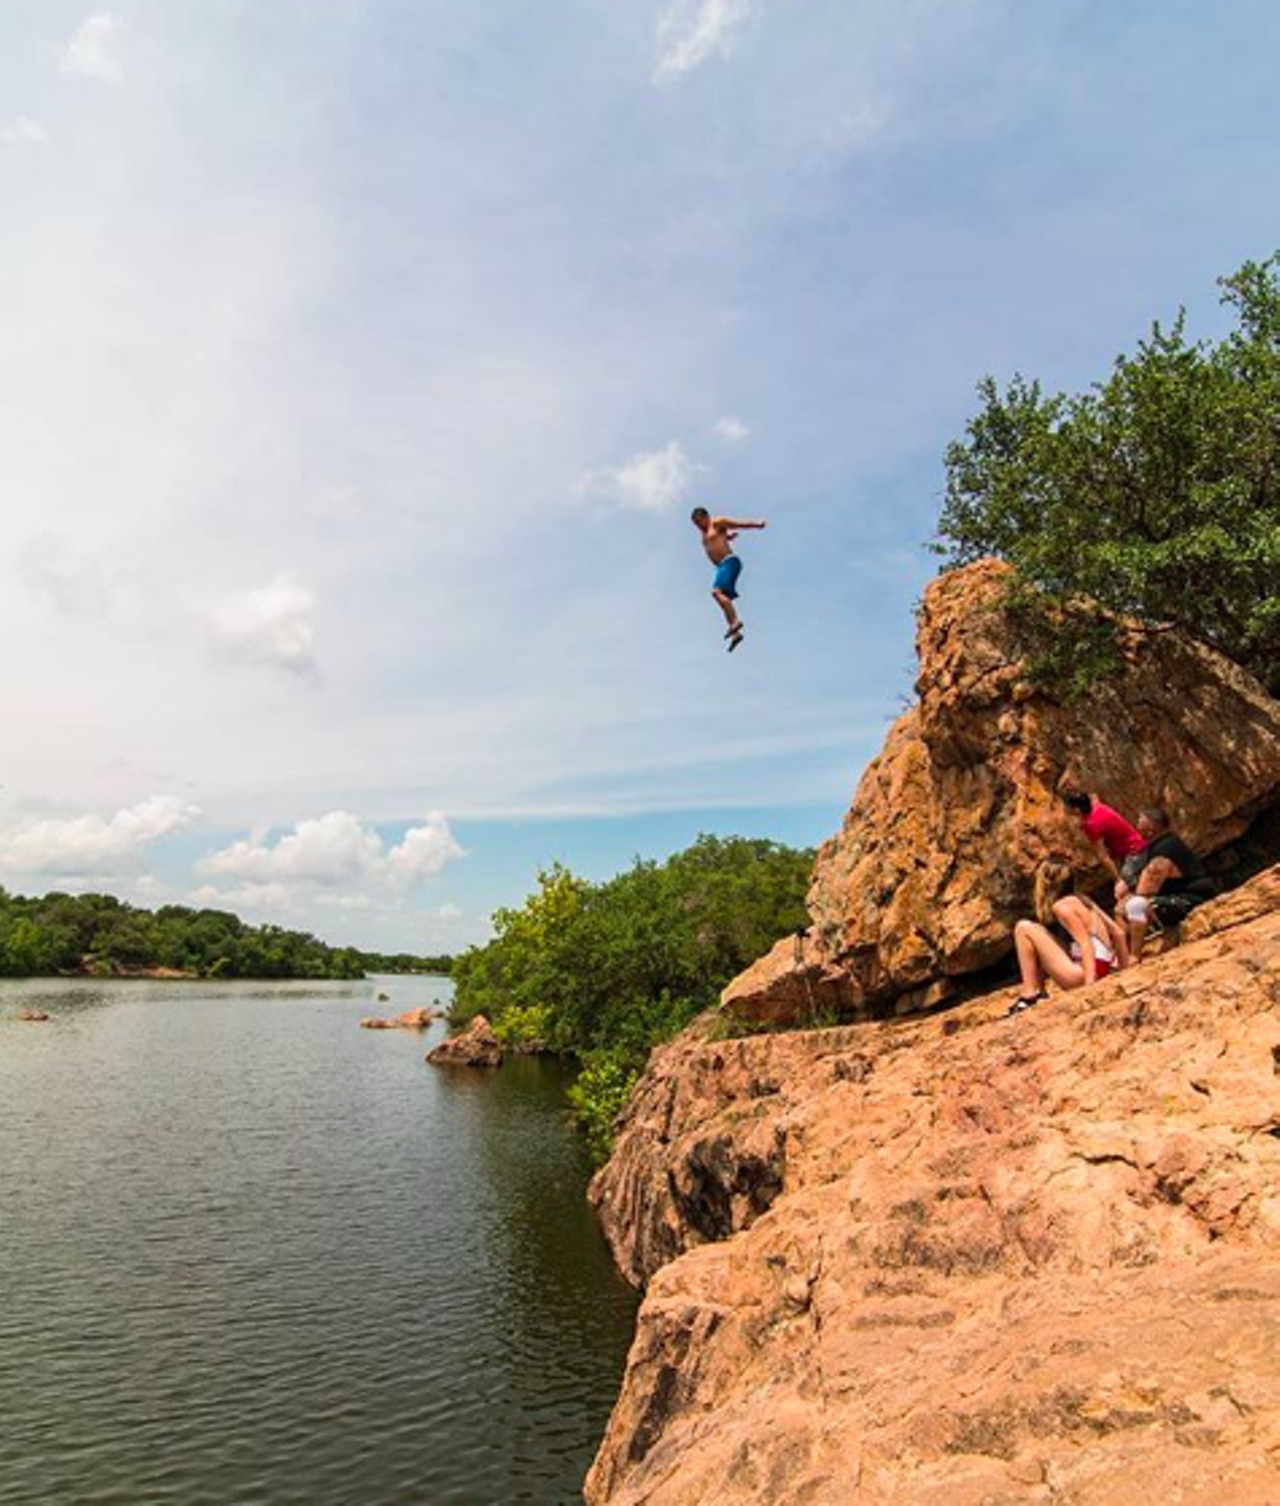 Inks Lake State Park
3630 Park Road 4 W, Burnet, (512) 793-2223, tpwd.texas.gov
Families wanting to squeeze in one last summer trip can feel secure about making plans to visit Inks Lake. Located in the Hill Country, this state park has plenty of family-friendly fun in water and on land. Here’s your chance to swim (do so at Devil’s Waterhole!), boat, water ski, fish and even scuba dive! If you prefer to stay dry, choose from camping, observing nature and hiking – there’s nine miles of trails!
Photo via Instagram / thewestexwindow